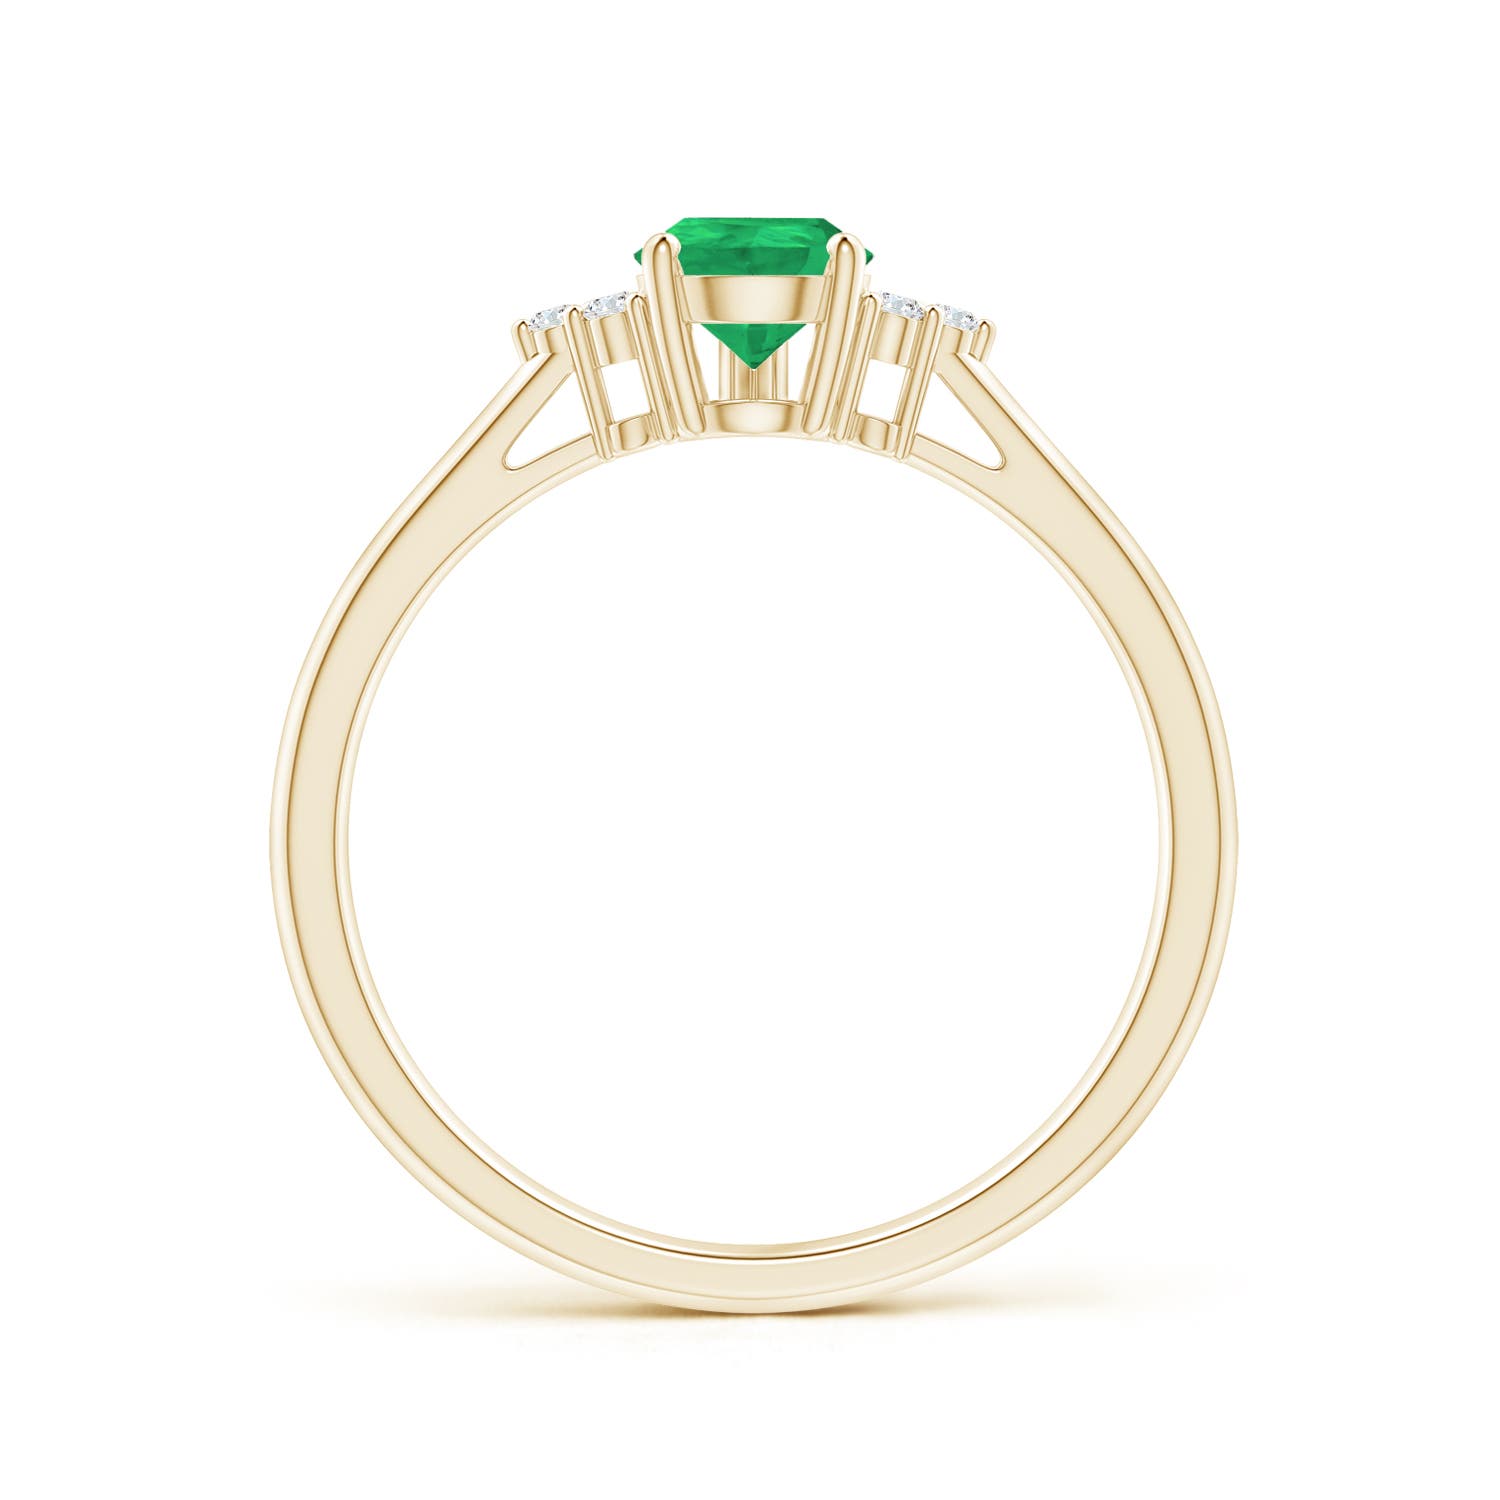 A - Emerald / 0.66 CT / 14 KT Yellow Gold